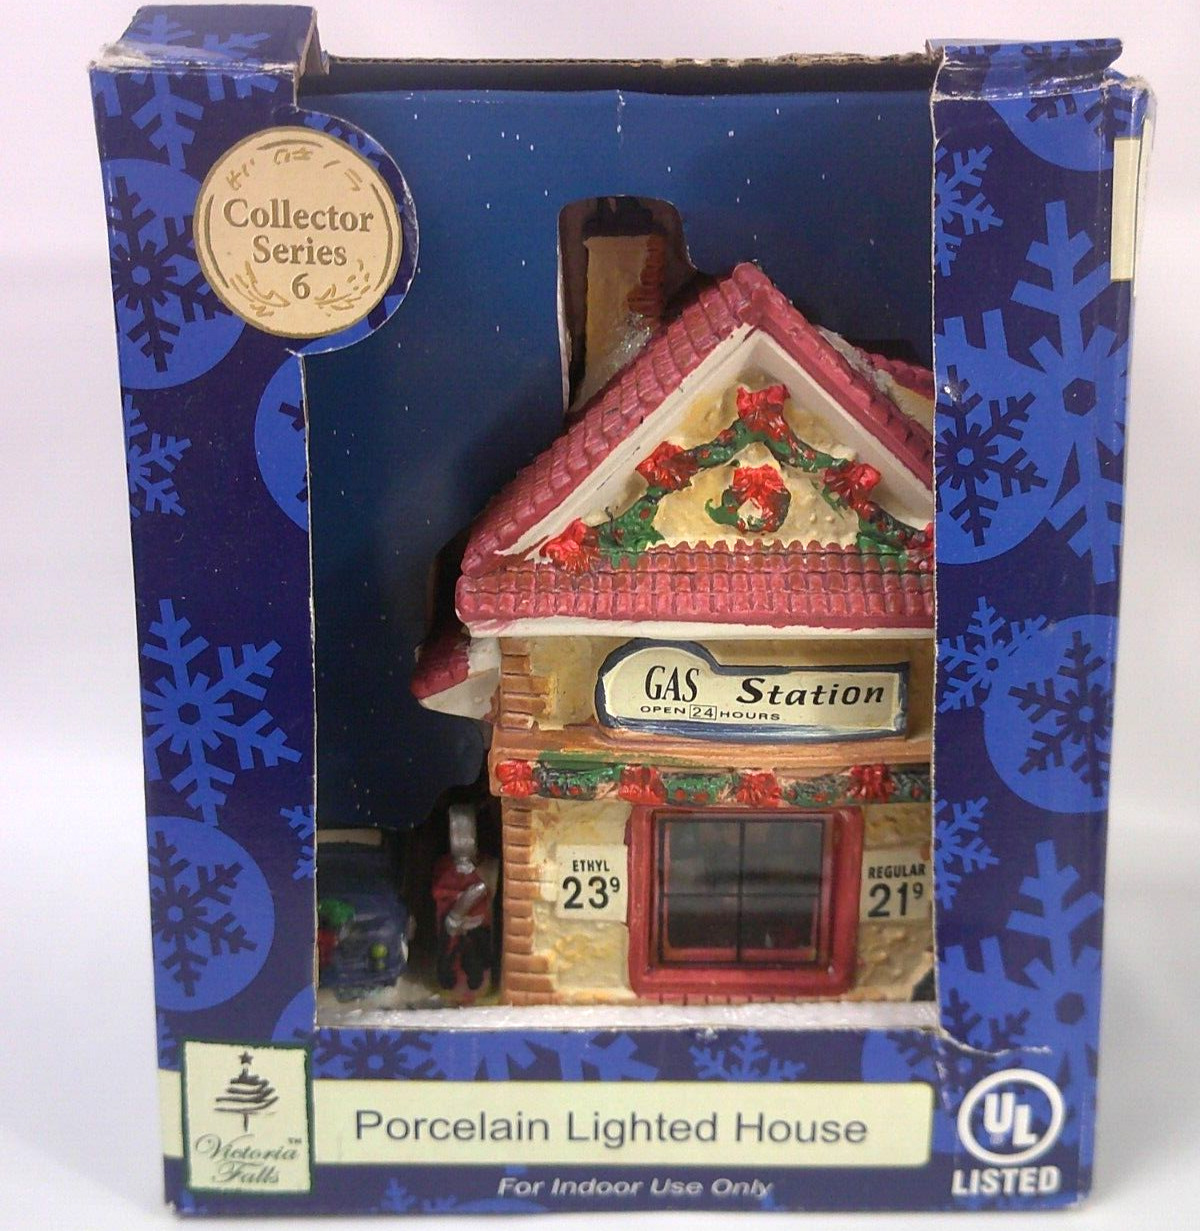 Victoria Falls Porcelain Lighted House Series 6 Gas Station Christmas Village